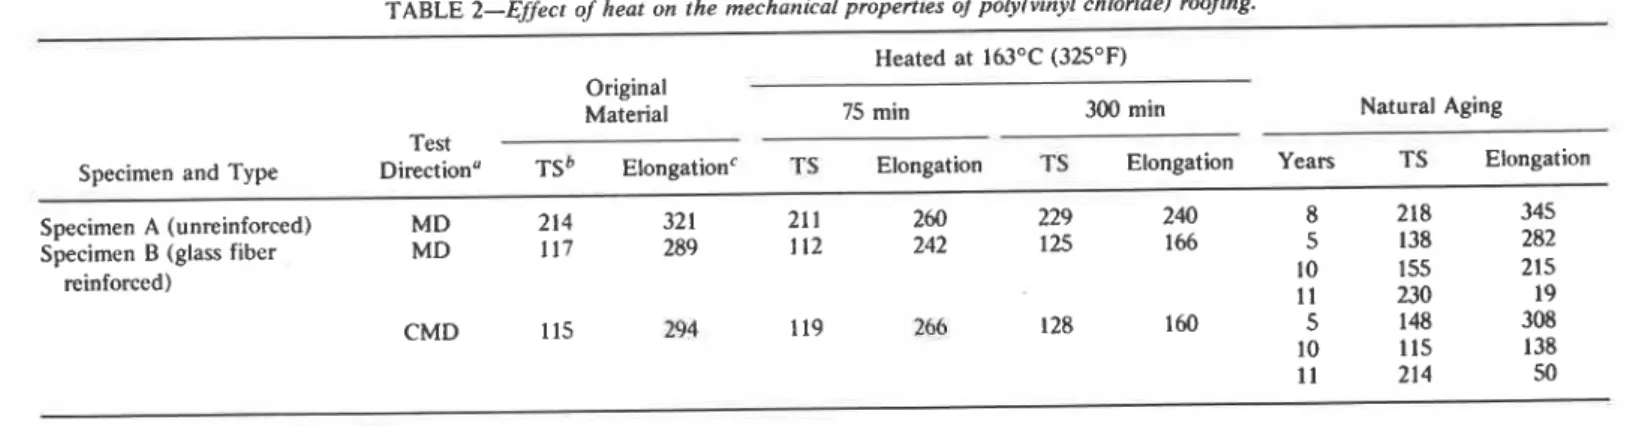 TABLE 2-Effect  of  heat on  the mechanical properties  of  poly/vinyl chloride) roofing